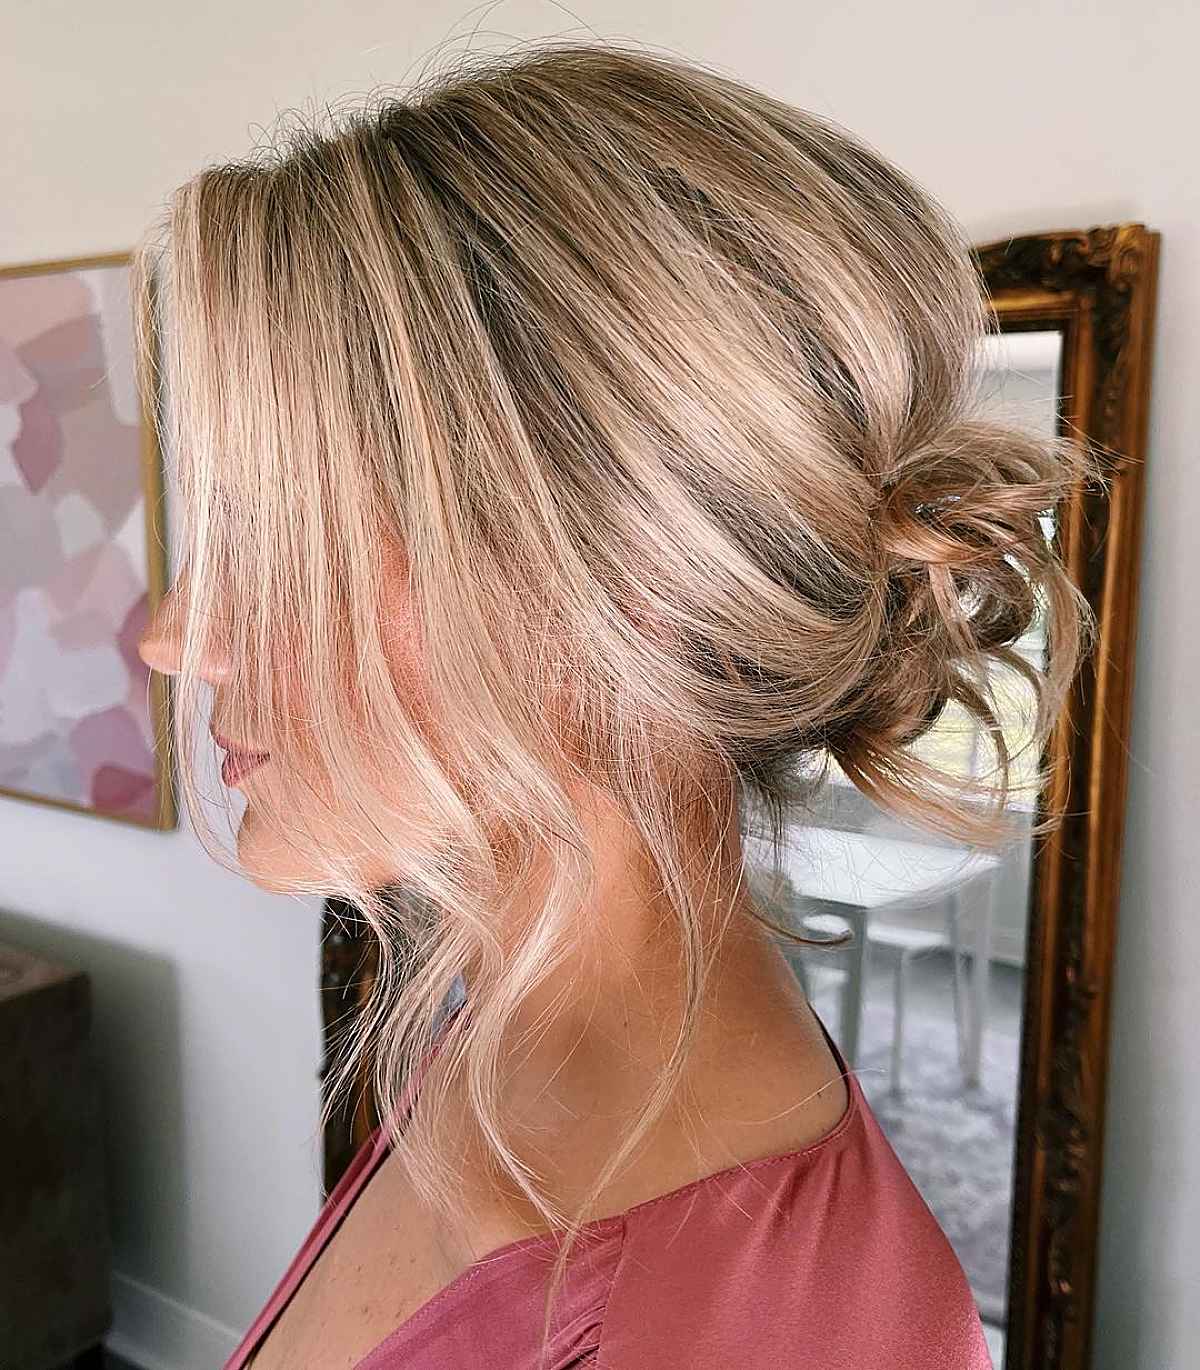 23 Amazing Low Bun Hairstyles You Can Do at Home 2023